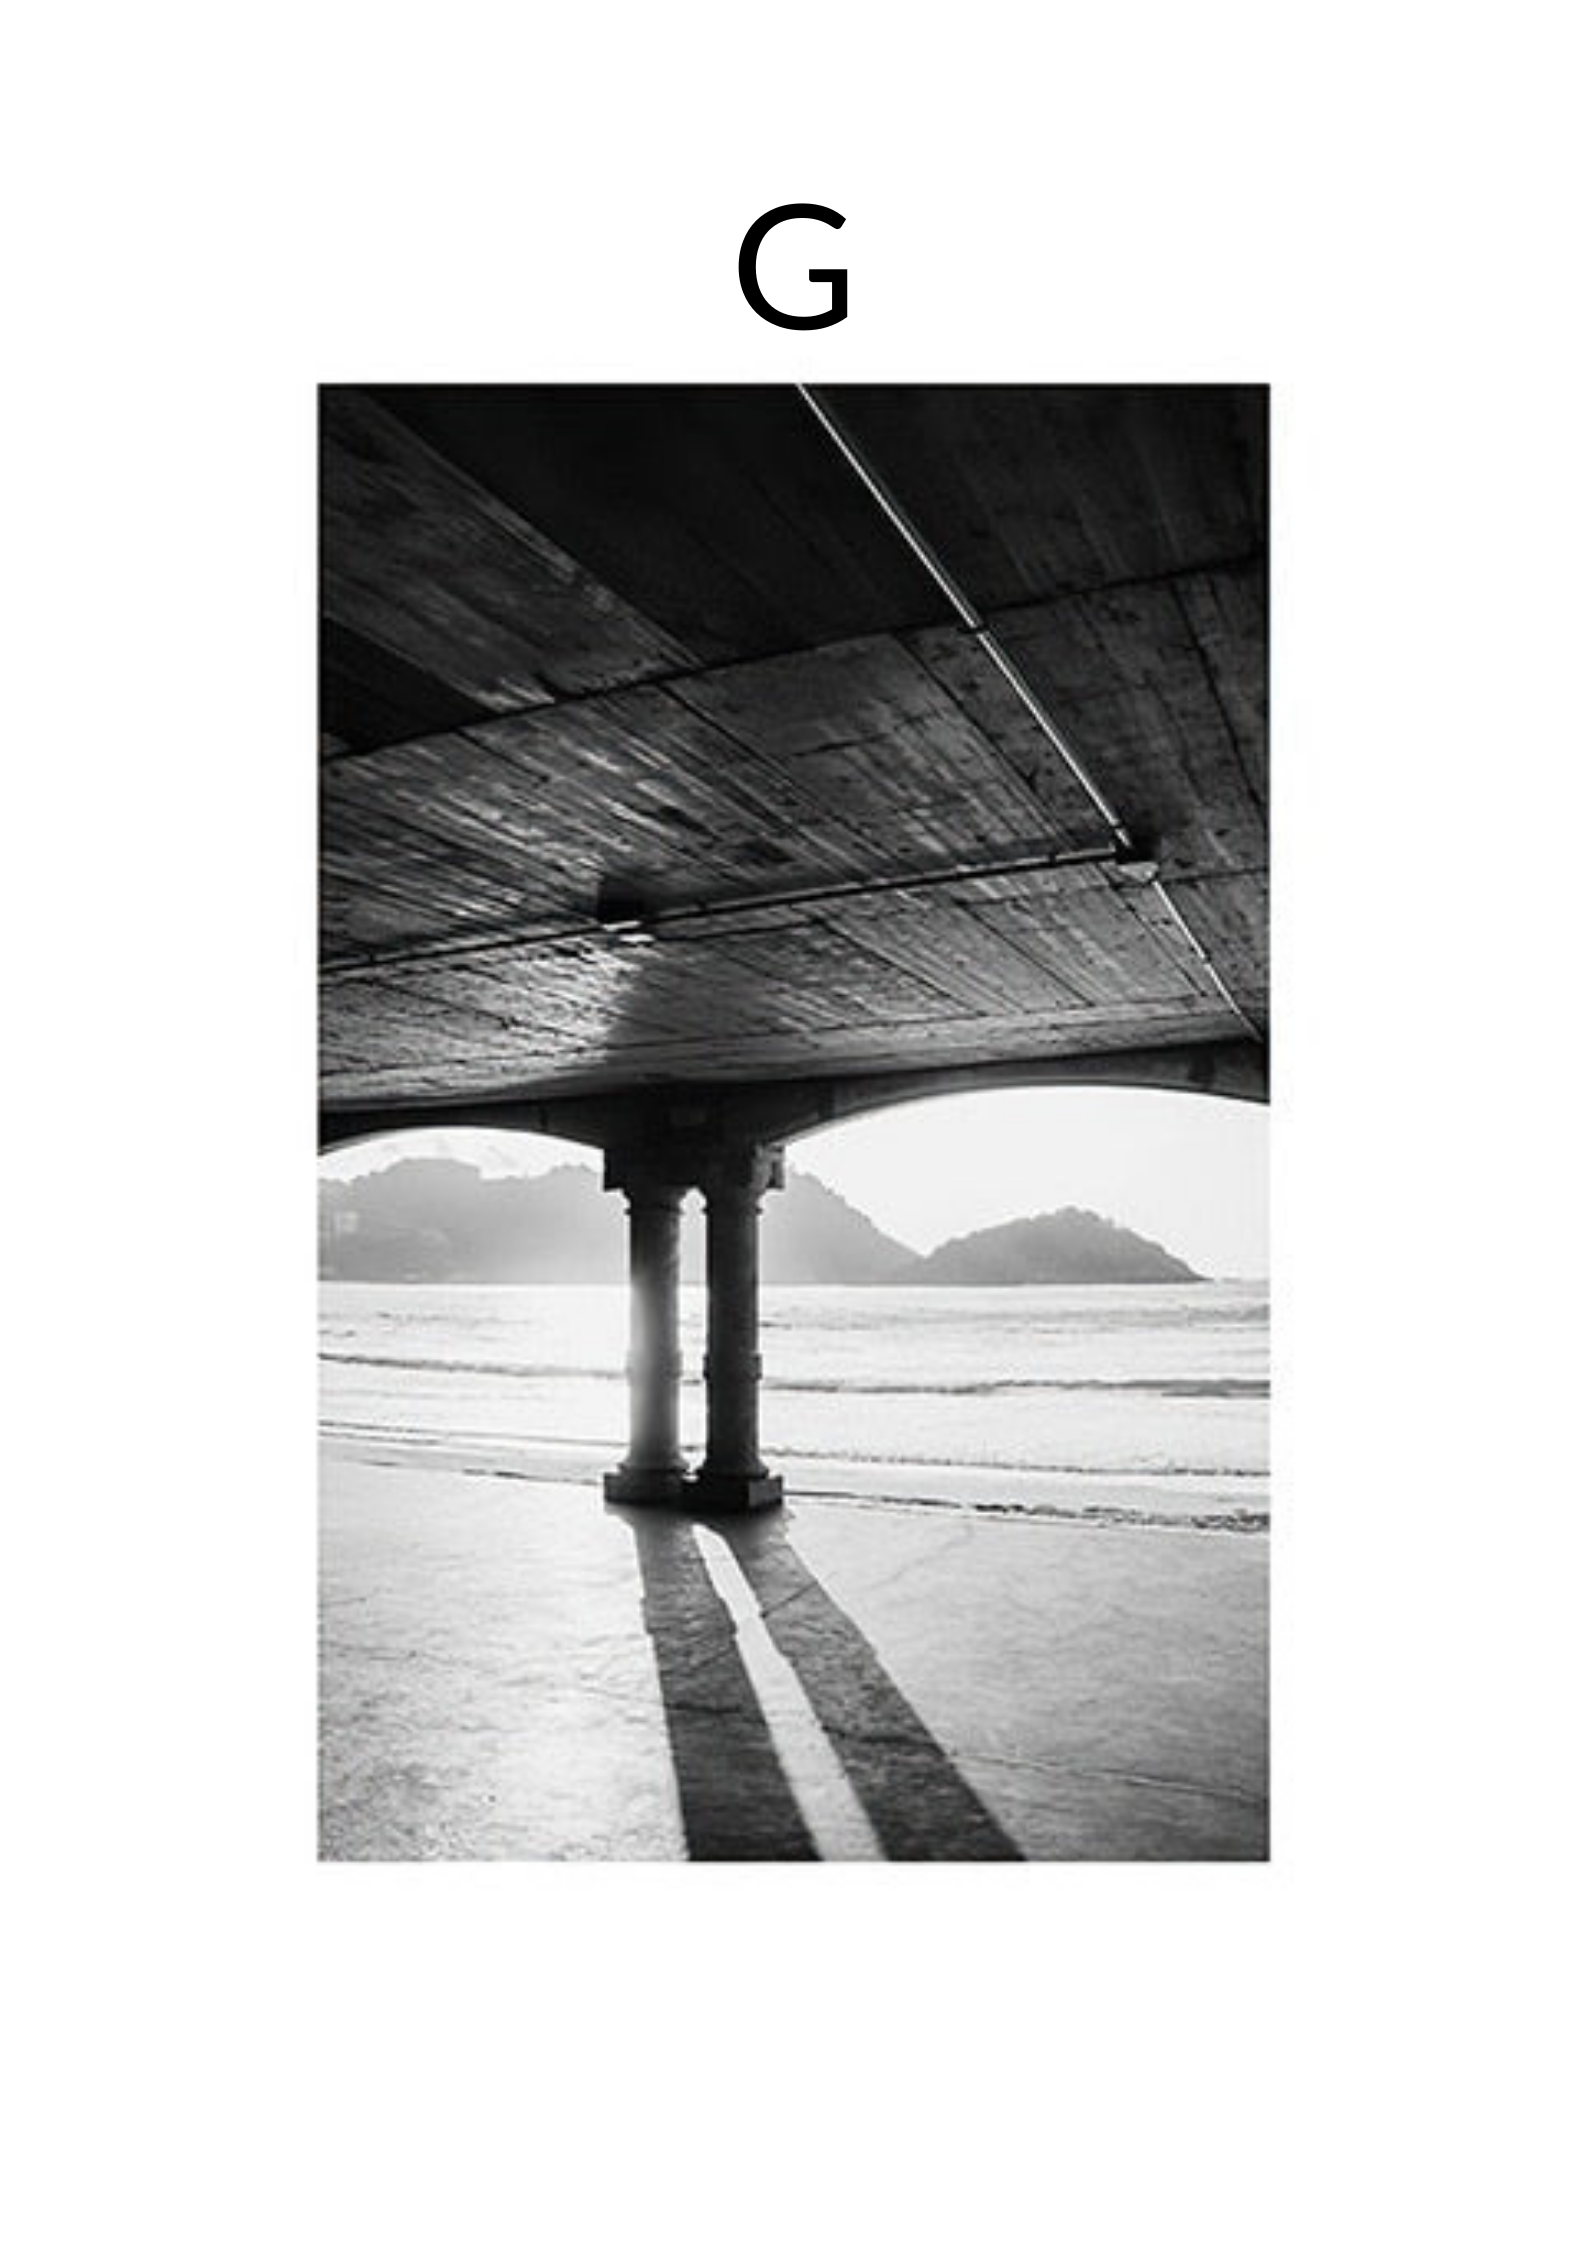 Abstract black and white underpass shadow wall art print